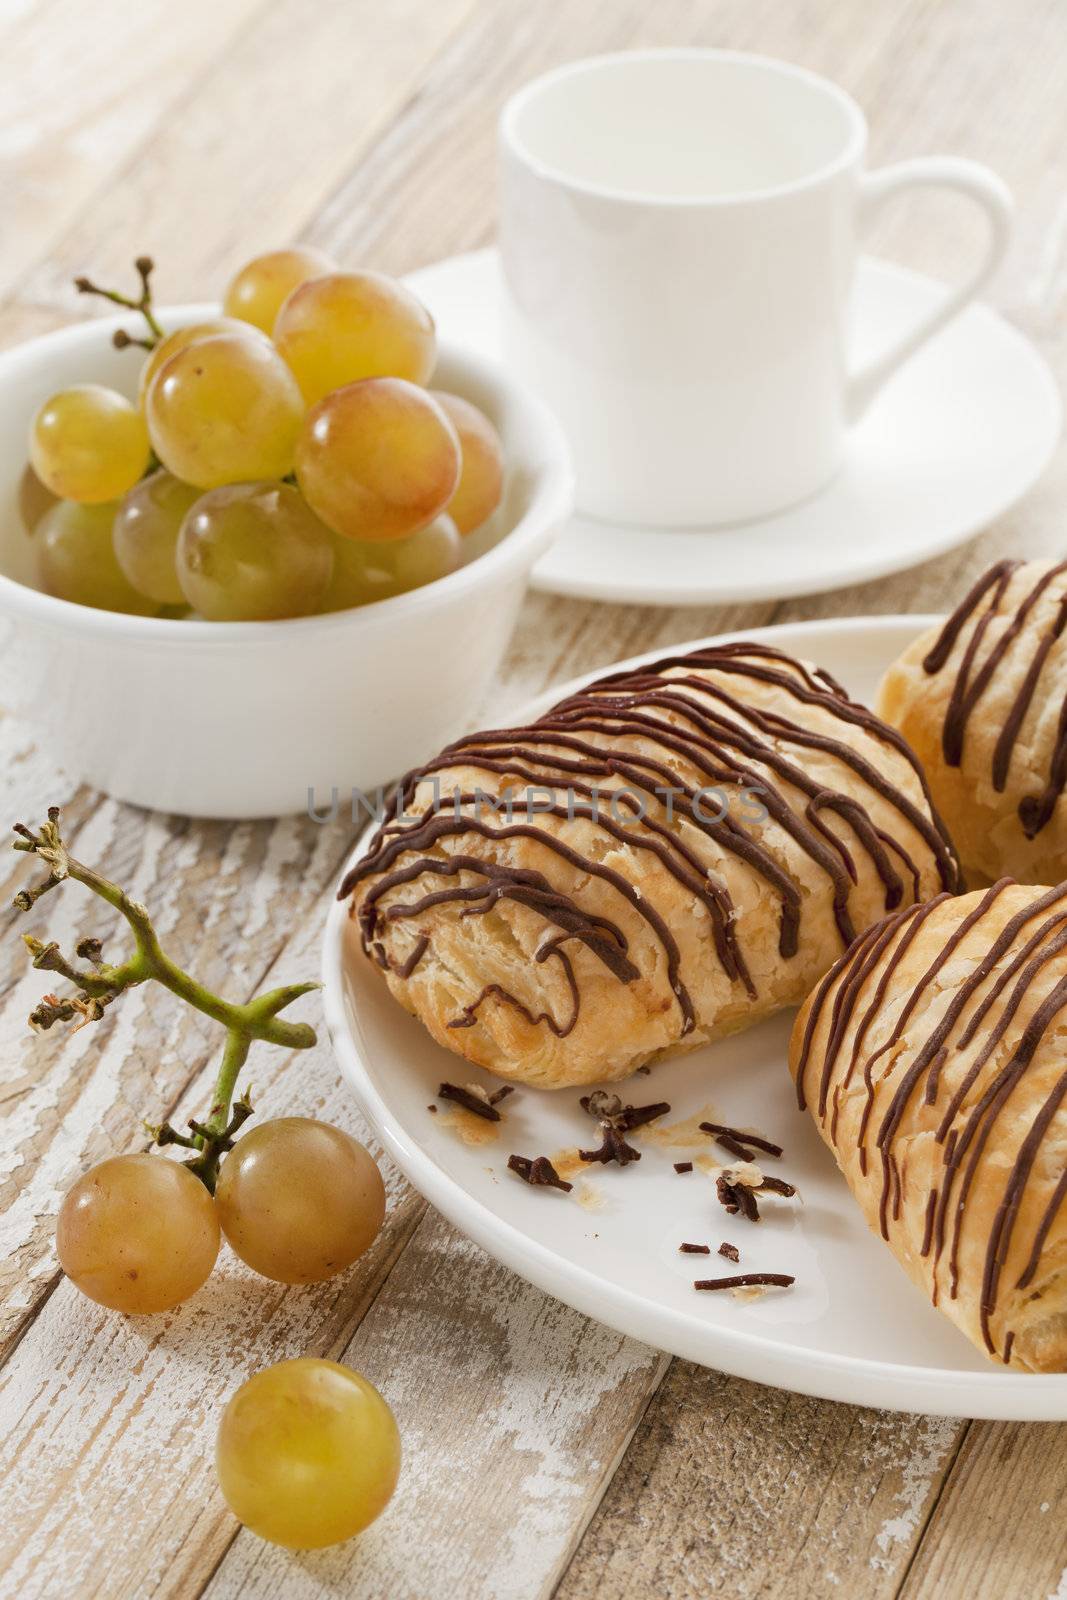 chocolate croissants, grapes and coffee by PixelsAway